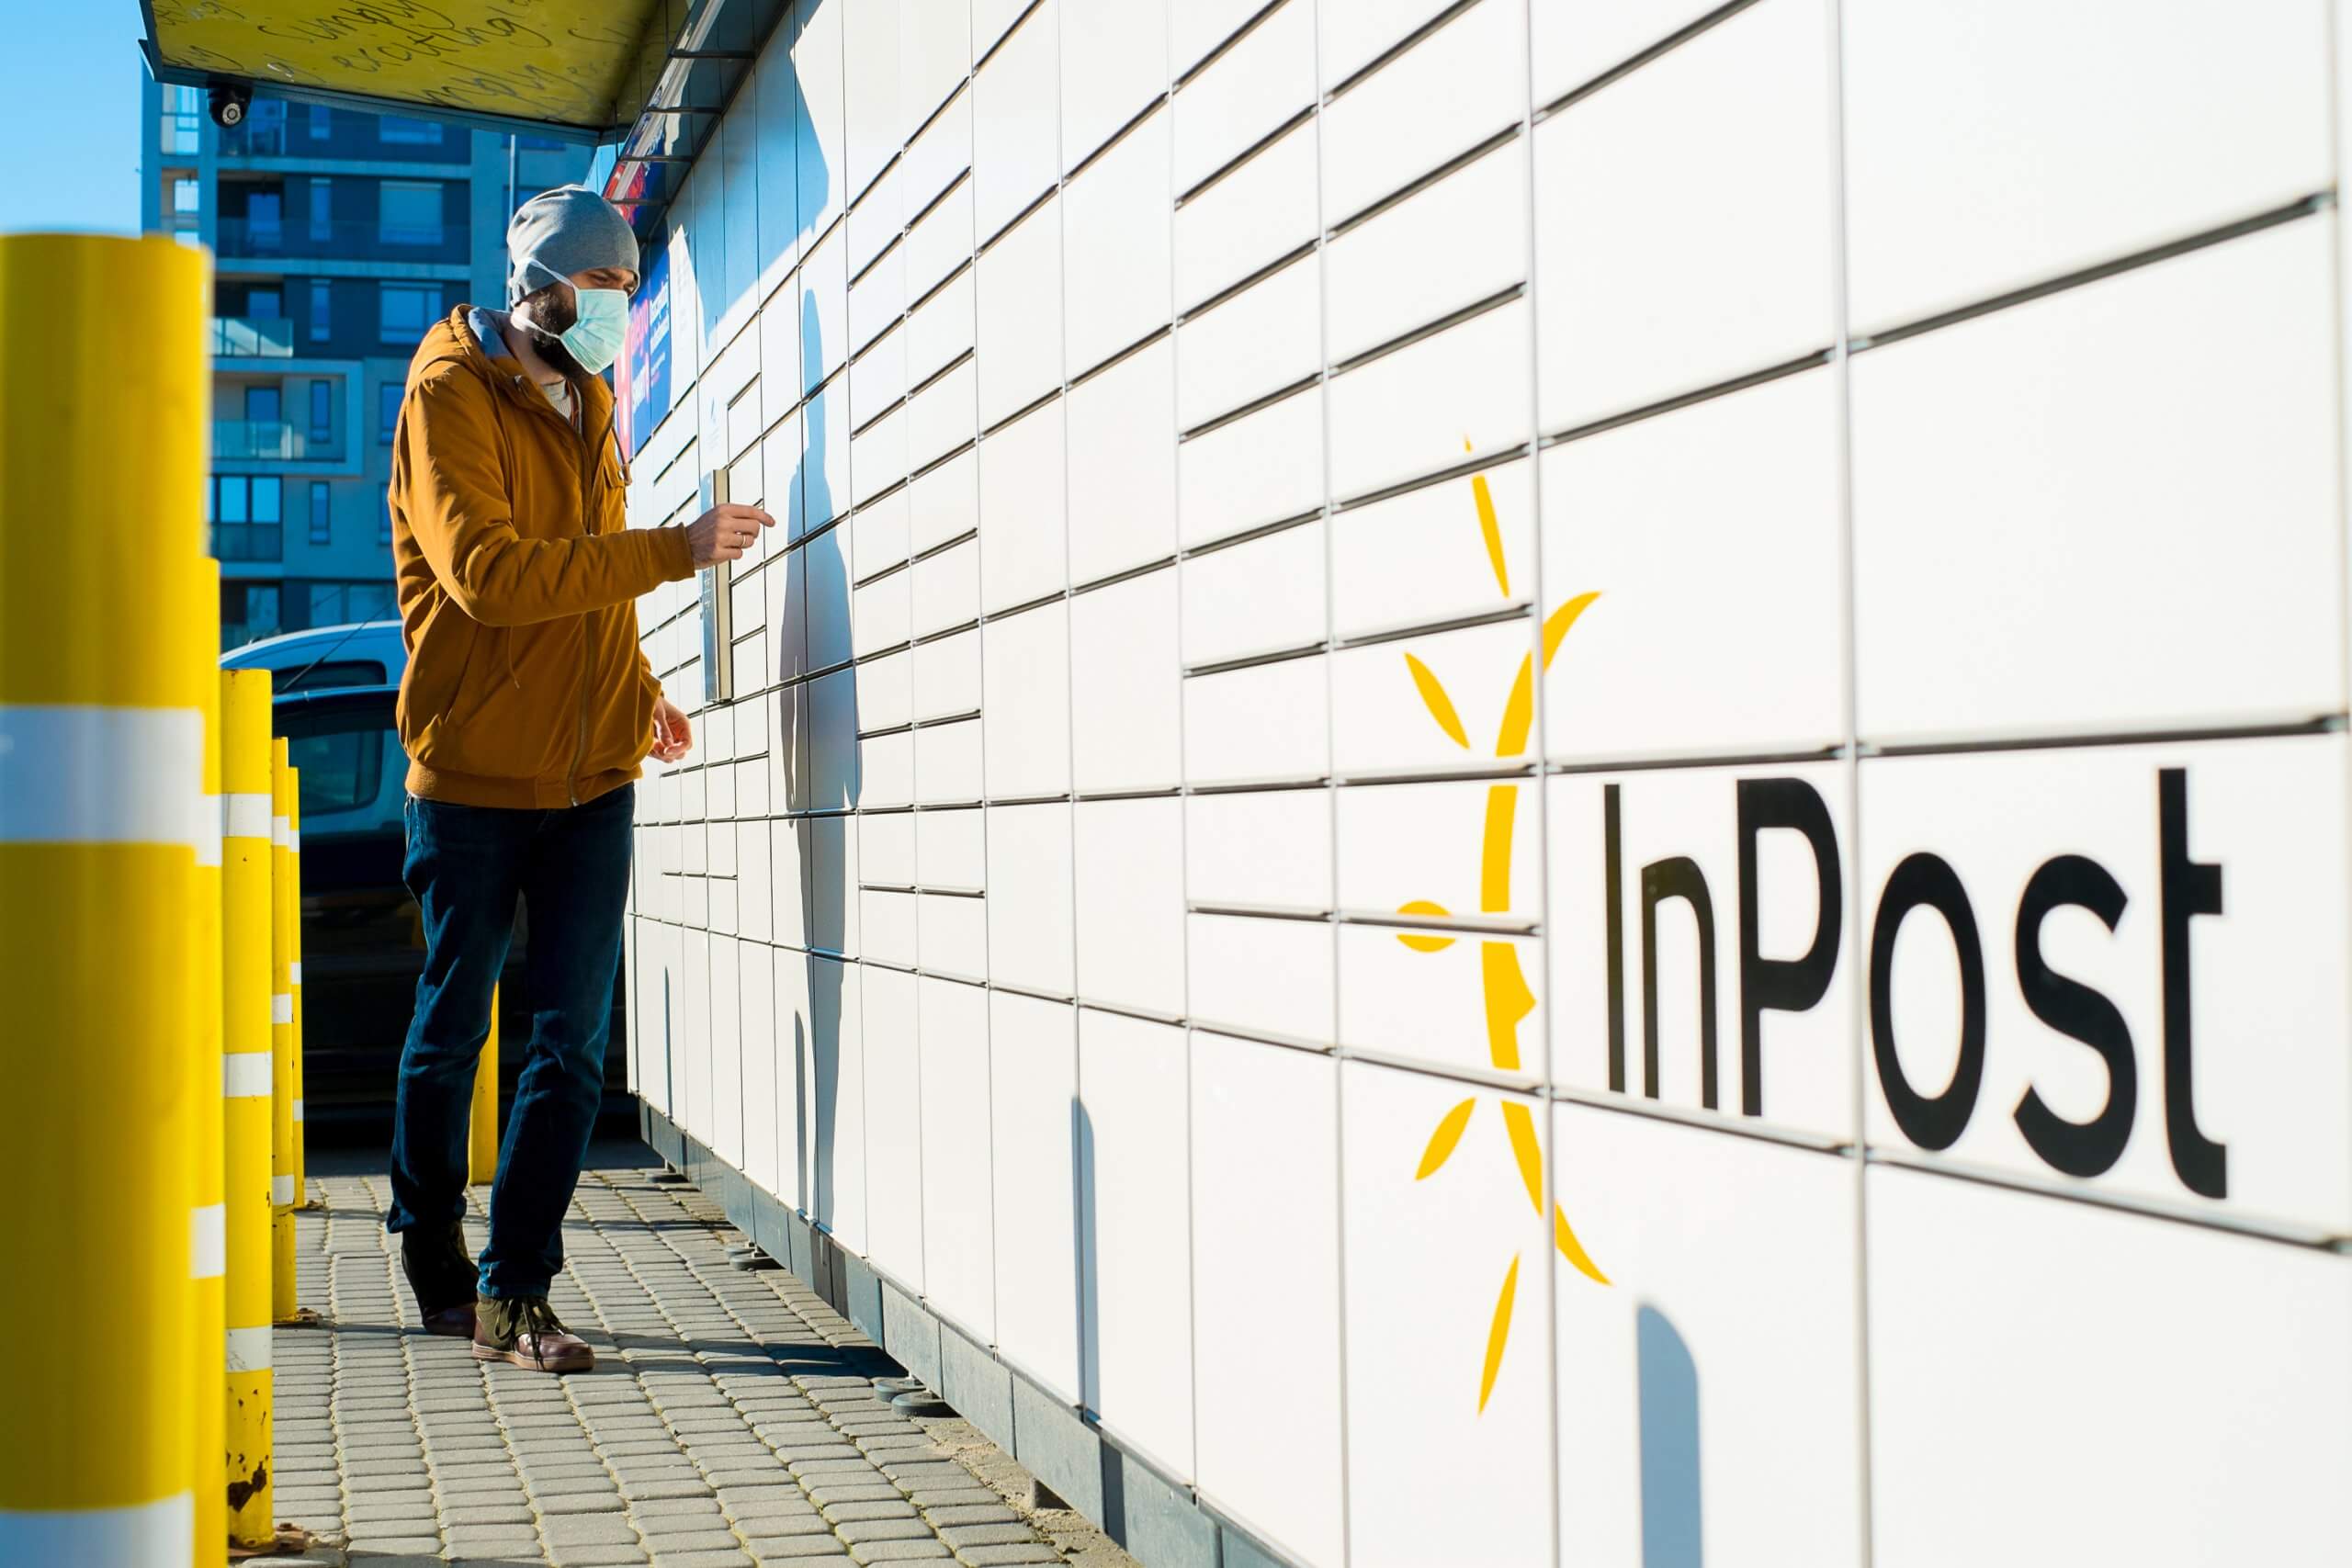 After conquering last-mile deliveries in Poland, InPost is steadily growing its UK presence with 2,000 locations, experienced hires, & express return policies